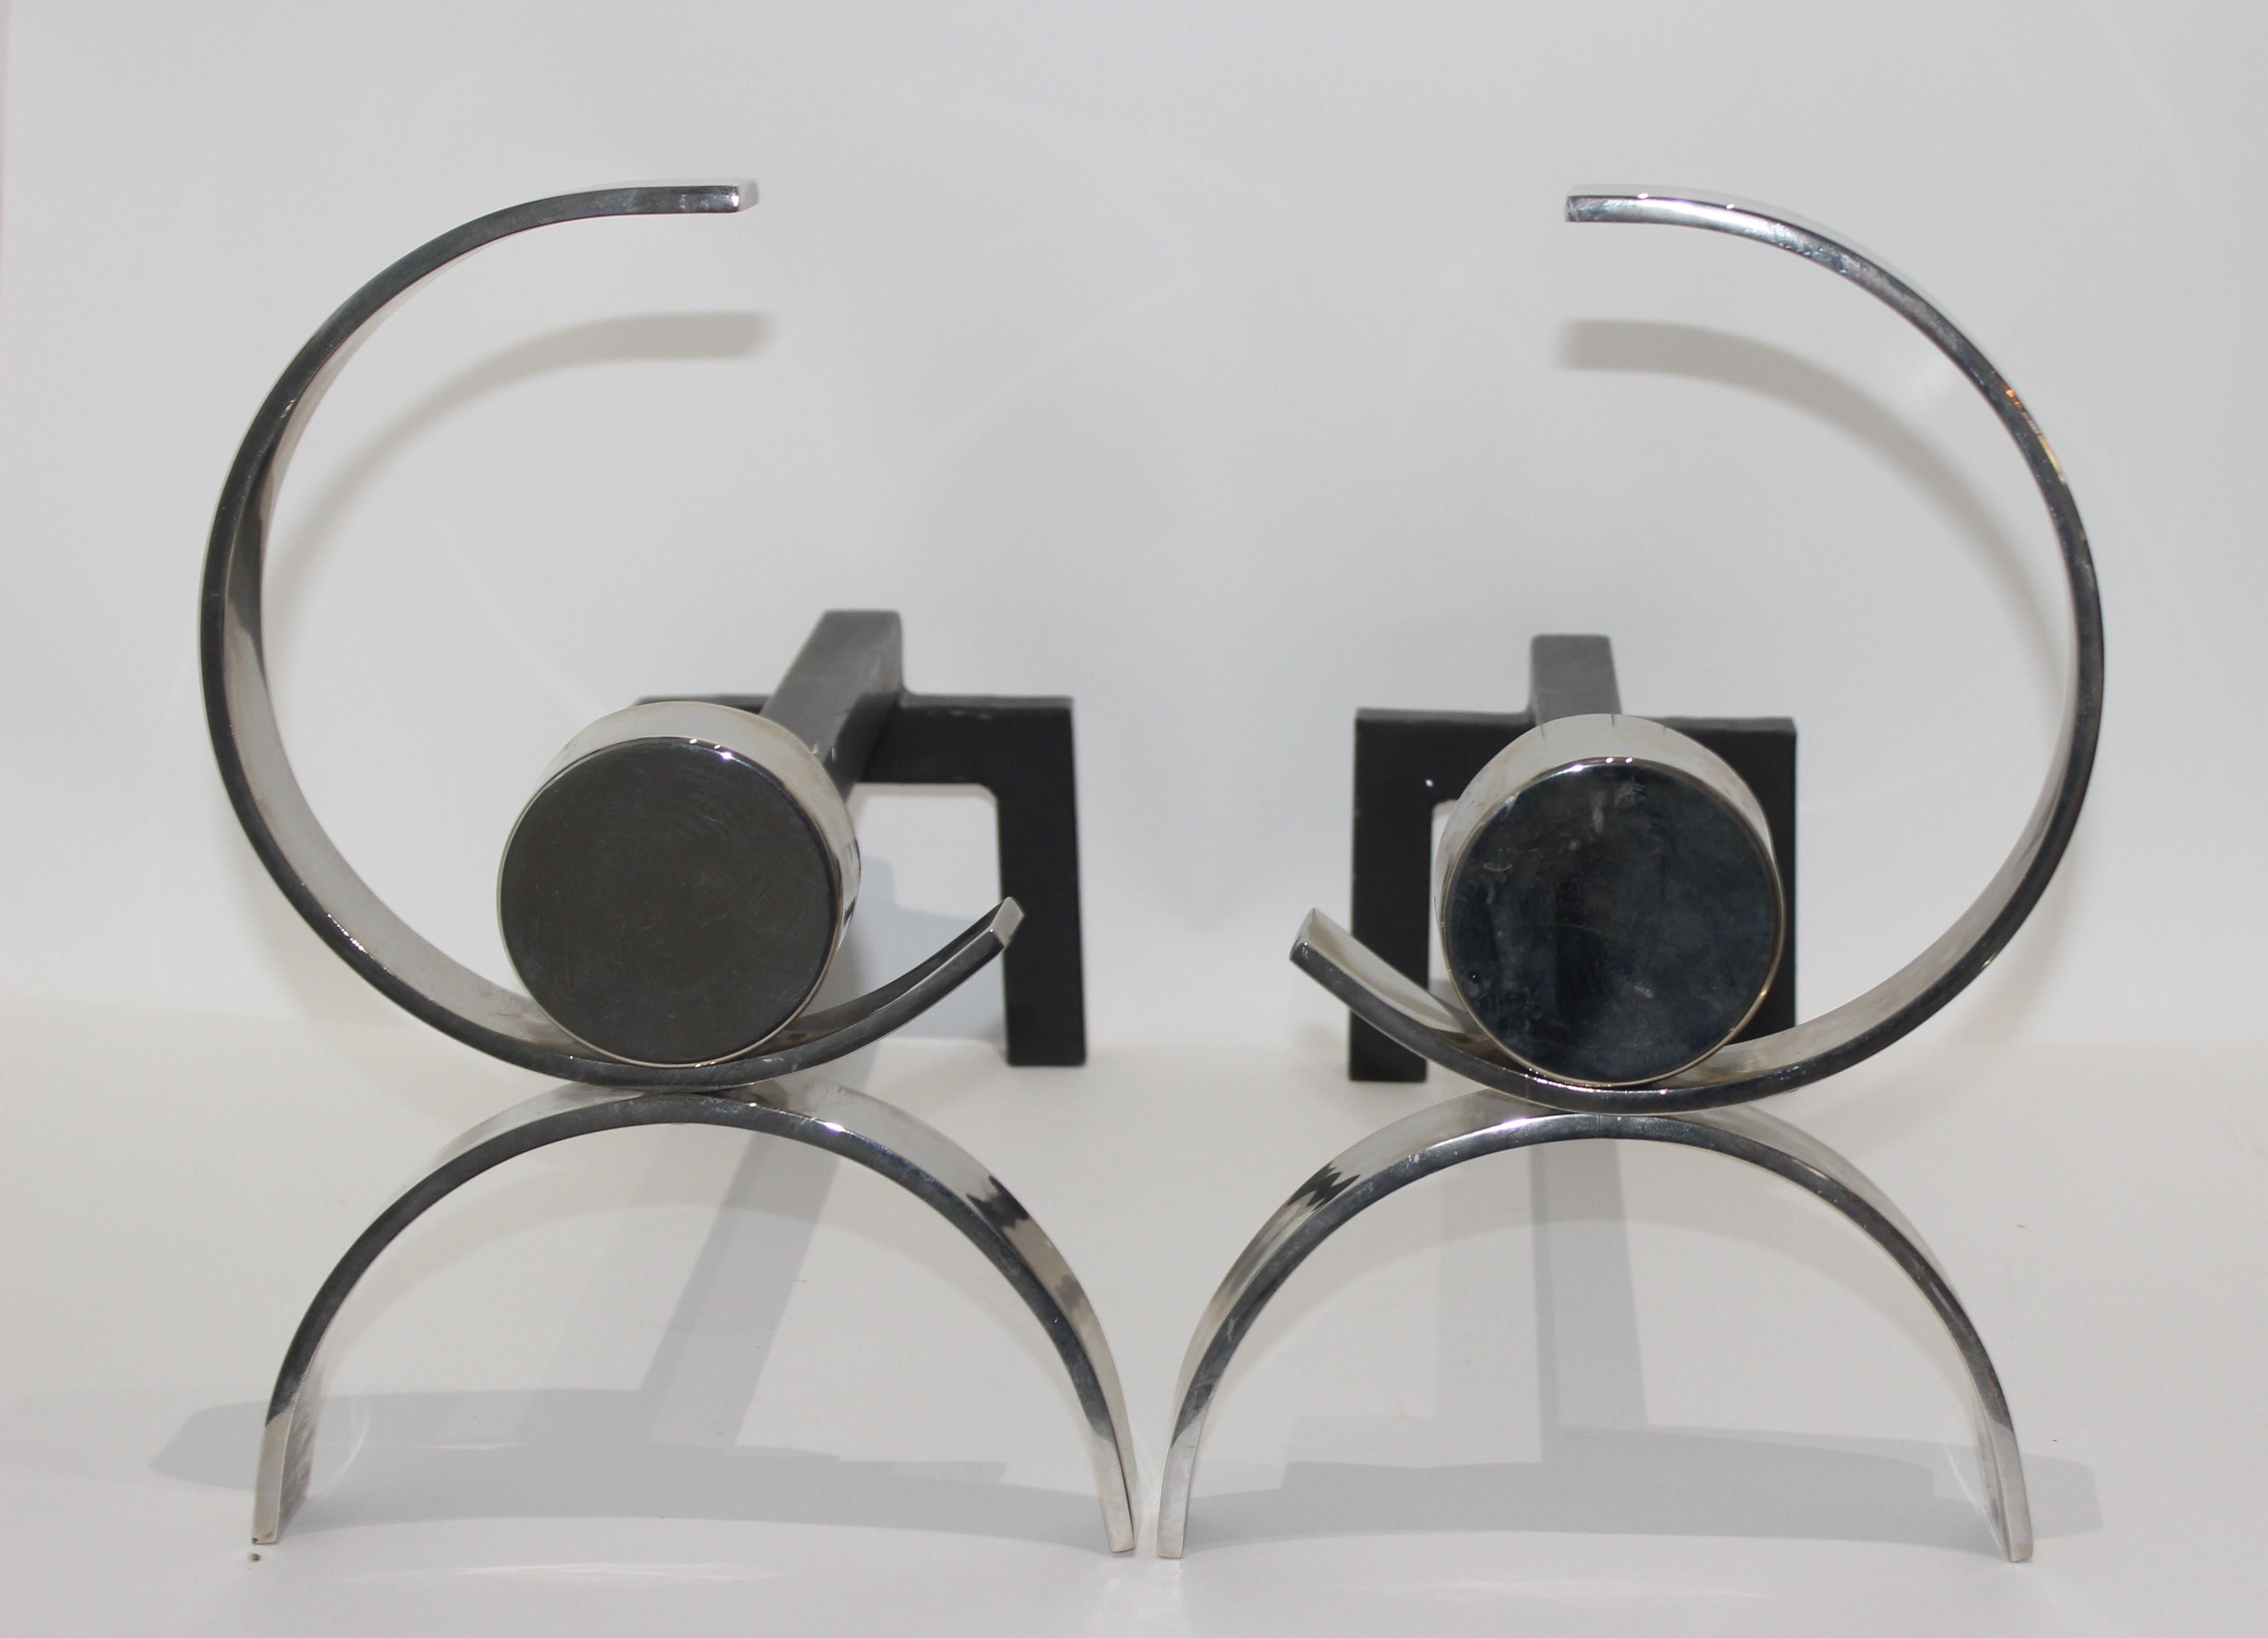 This stylish moderne set of andirons date to the late 1930s-early 1940s and were created by the iconic American designer Donald Deskey and they were acquired from a Miami Beach estate.